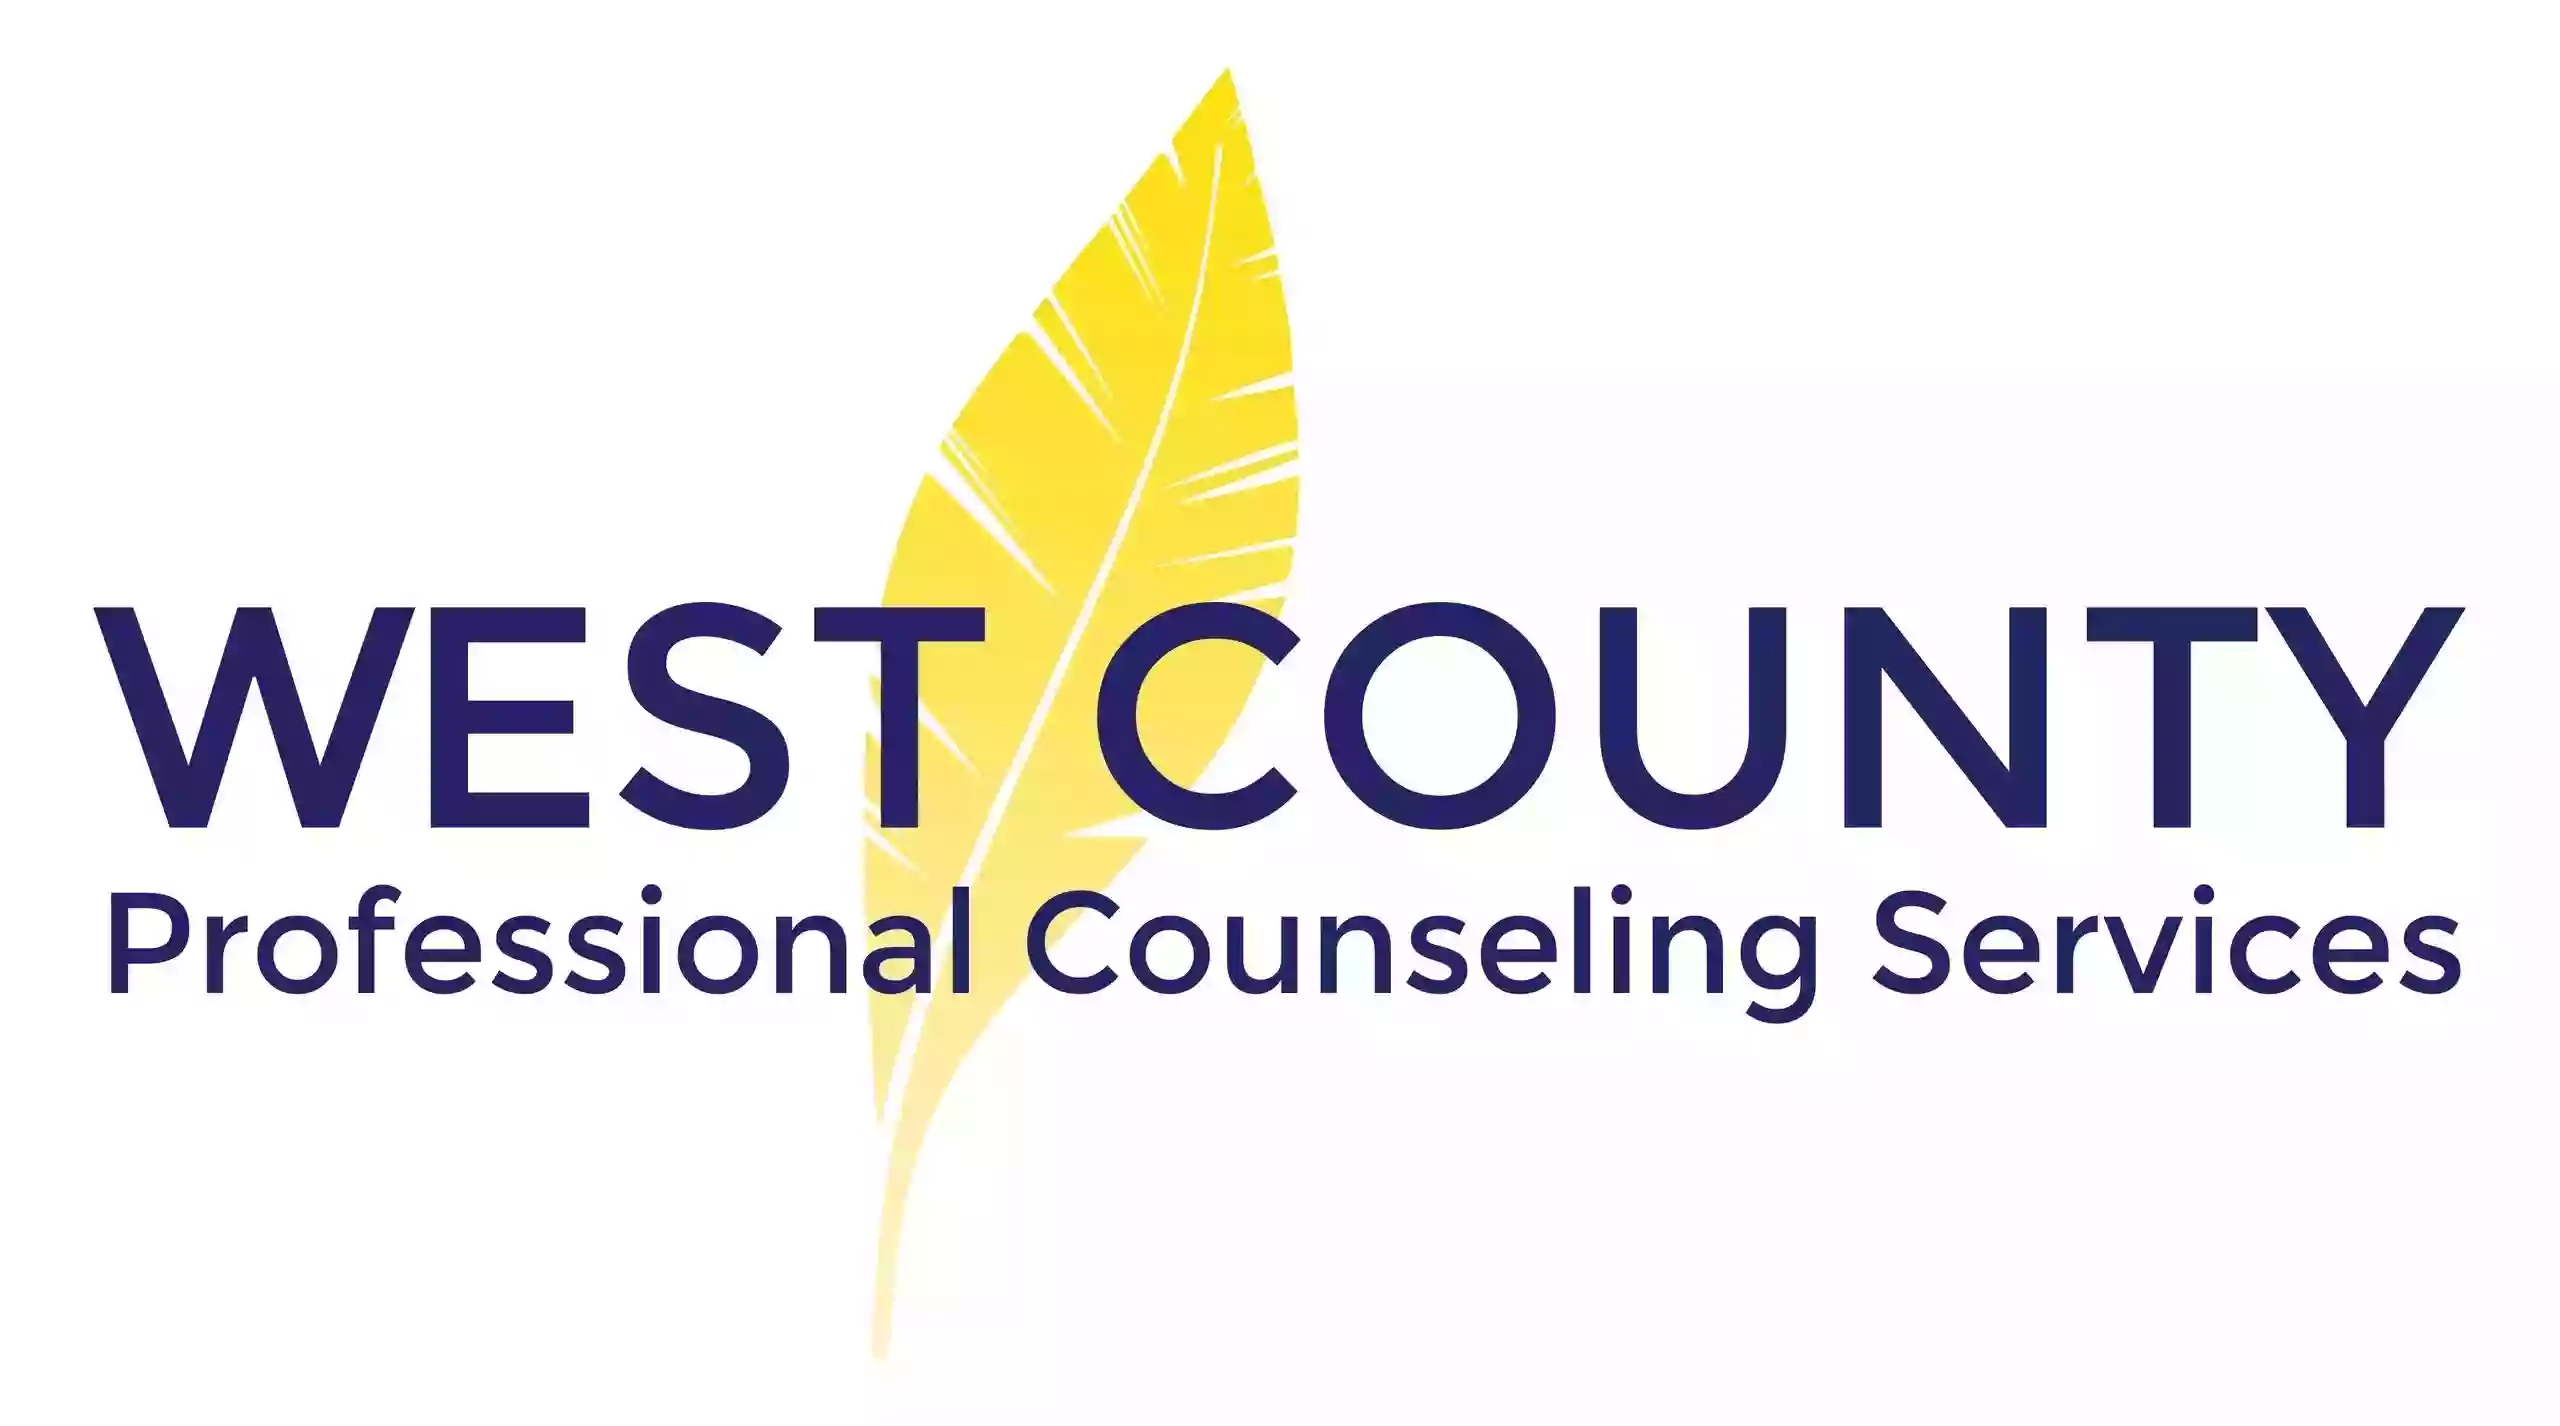 West County Professional Counseling Services, LLC